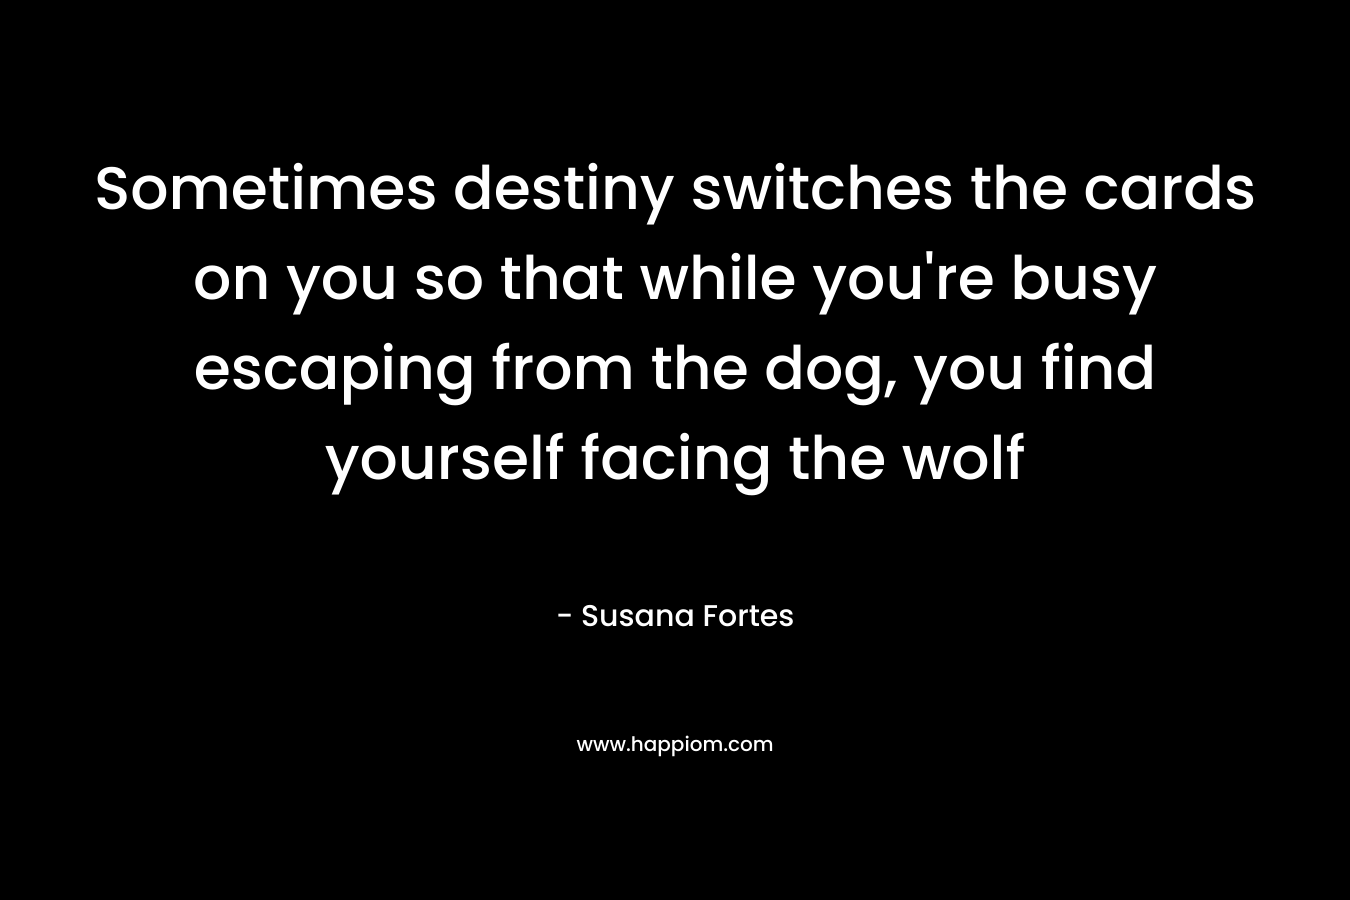 Sometimes destiny switches the cards on you so that while you're busy escaping from the dog, you find yourself facing the wolf